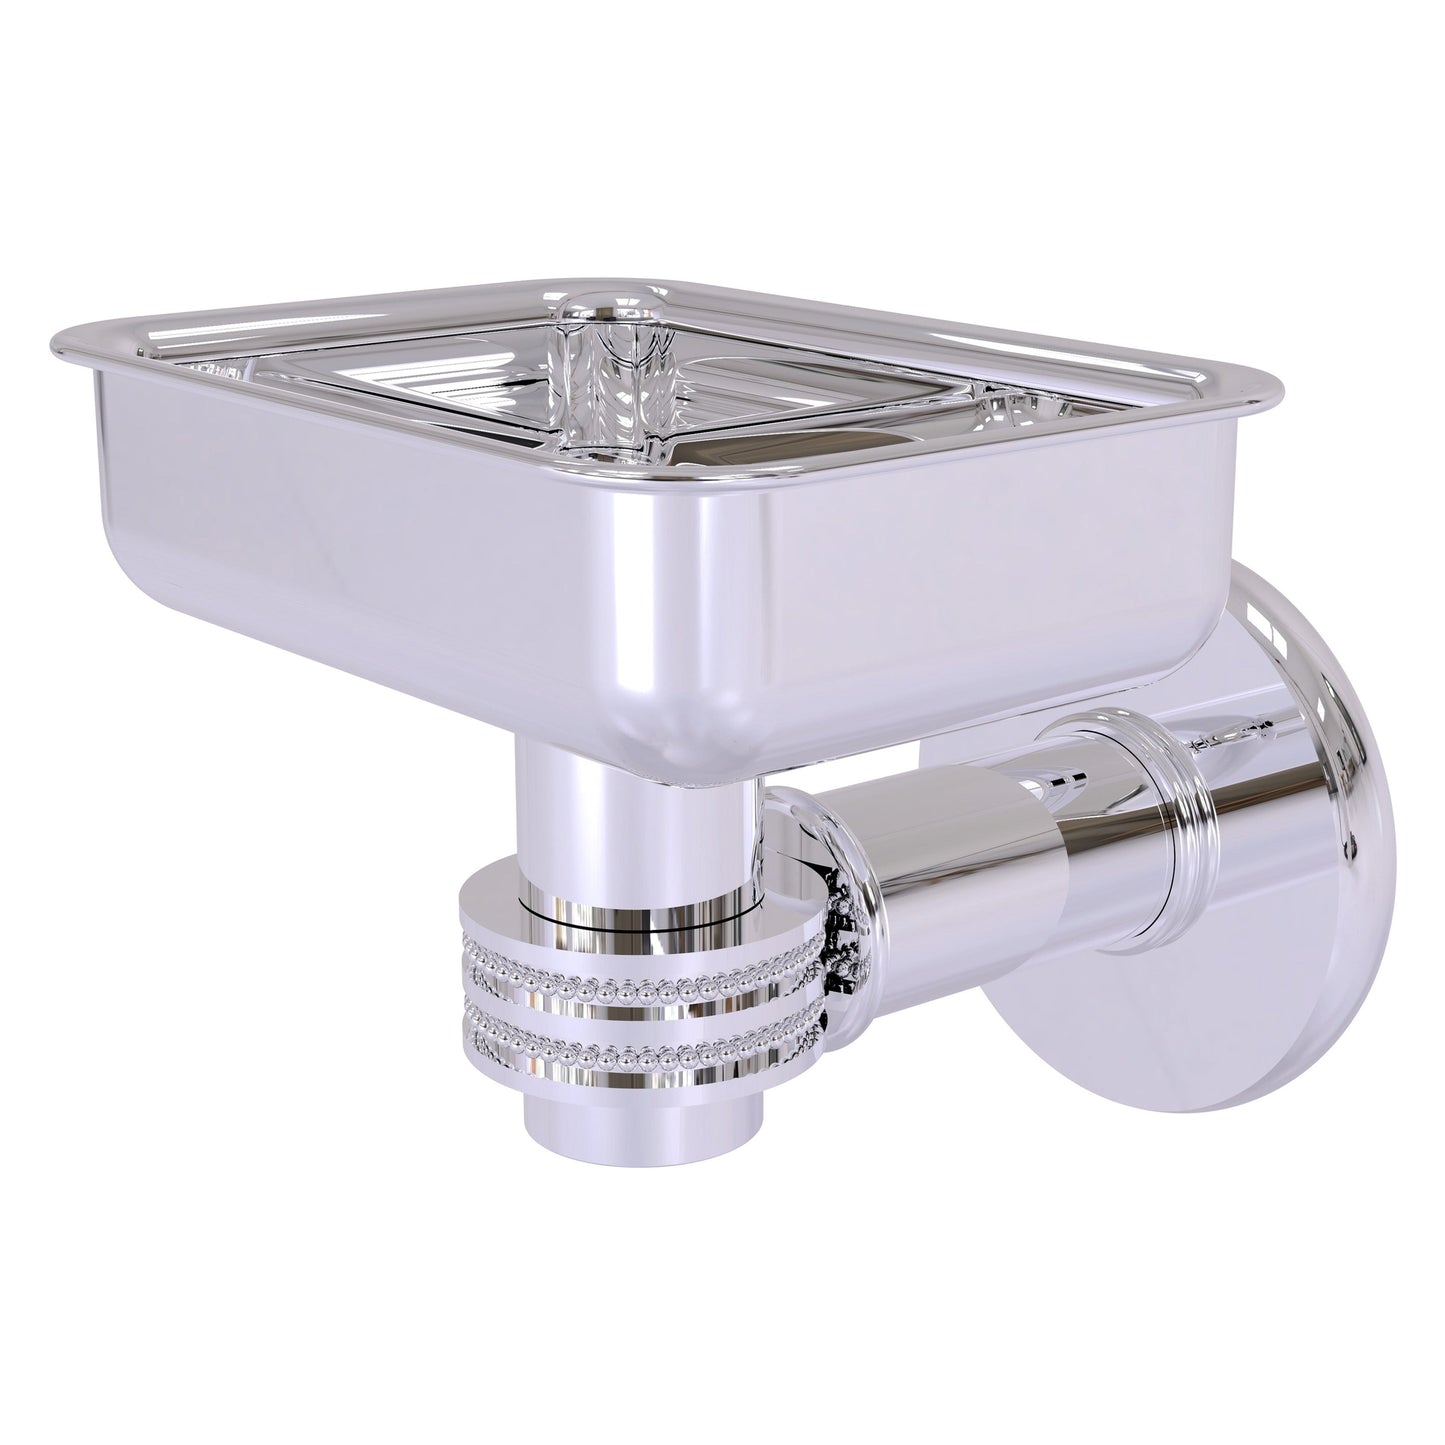 Allied Brass Continental 4.5" x 3.5" Polished Chrome Solid Brass Wall-Mounted Soap Dish Holder with Dotted Accents